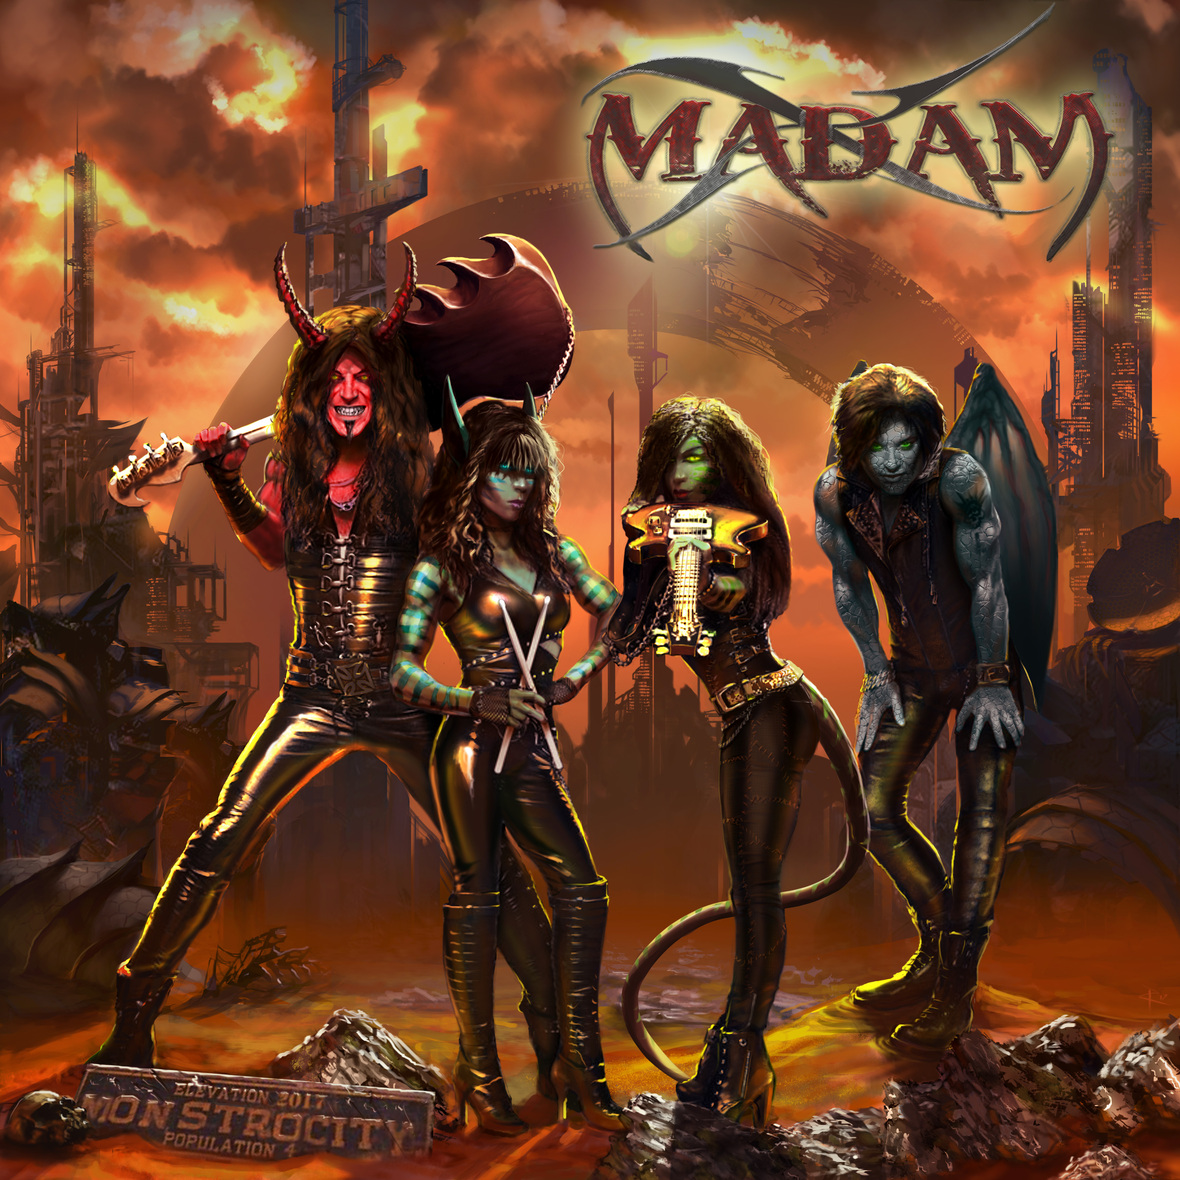 Legendary Detroit Rockers Madam X sign to EMP Label Group and release